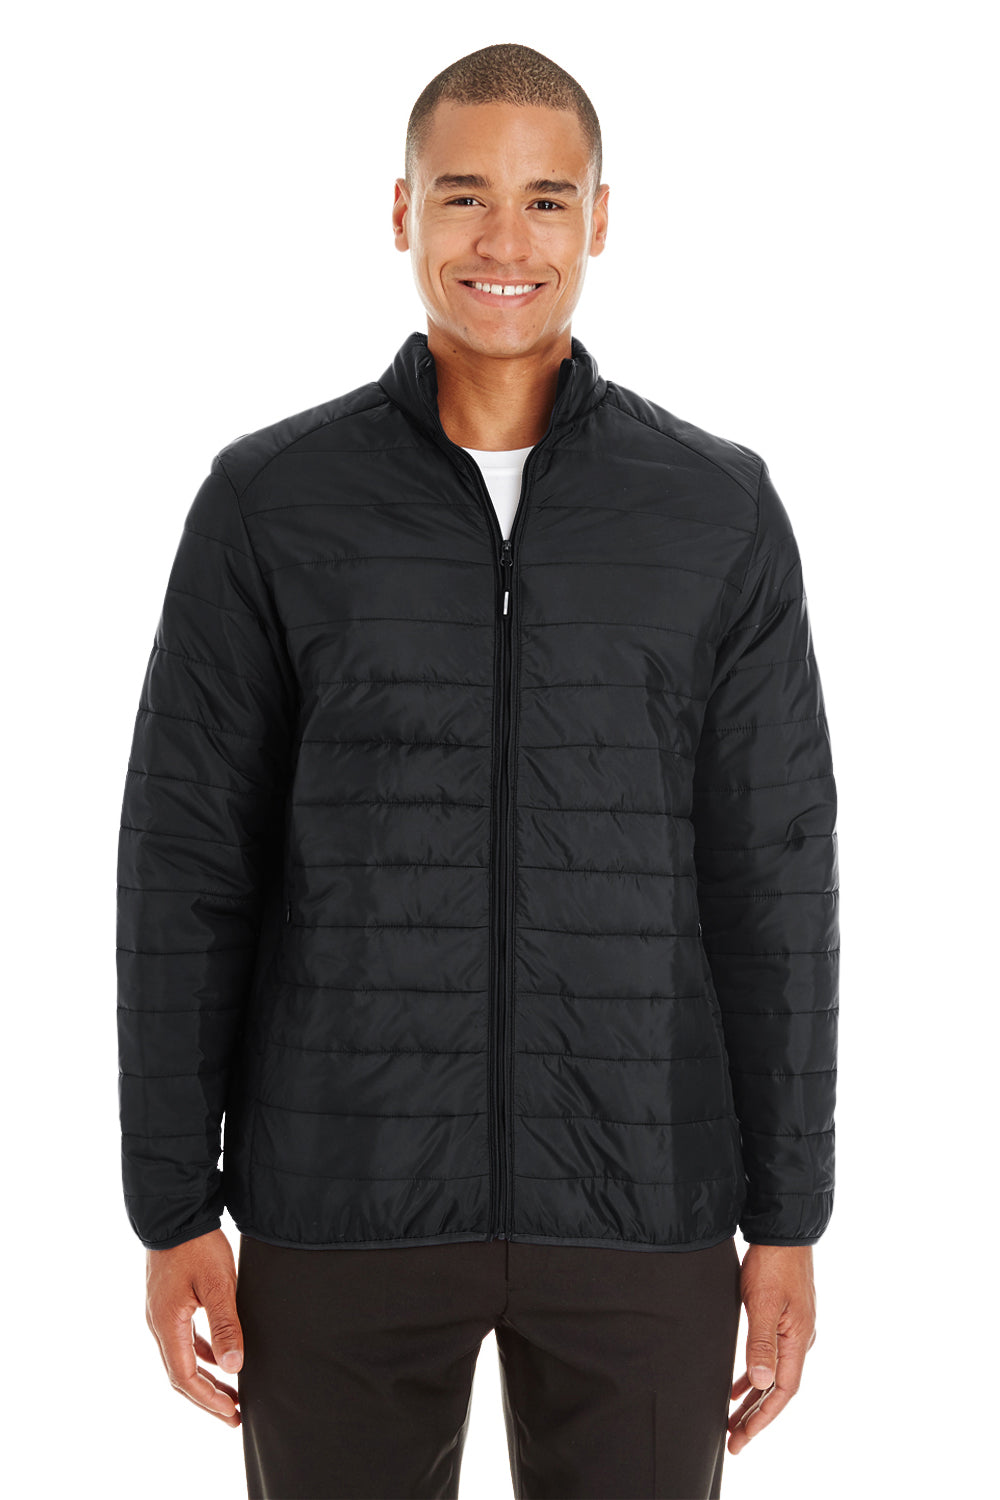 Core 365 CE700 Mens Prevail Packable Puffer Water Resistant Full Zip Jacket Black Front